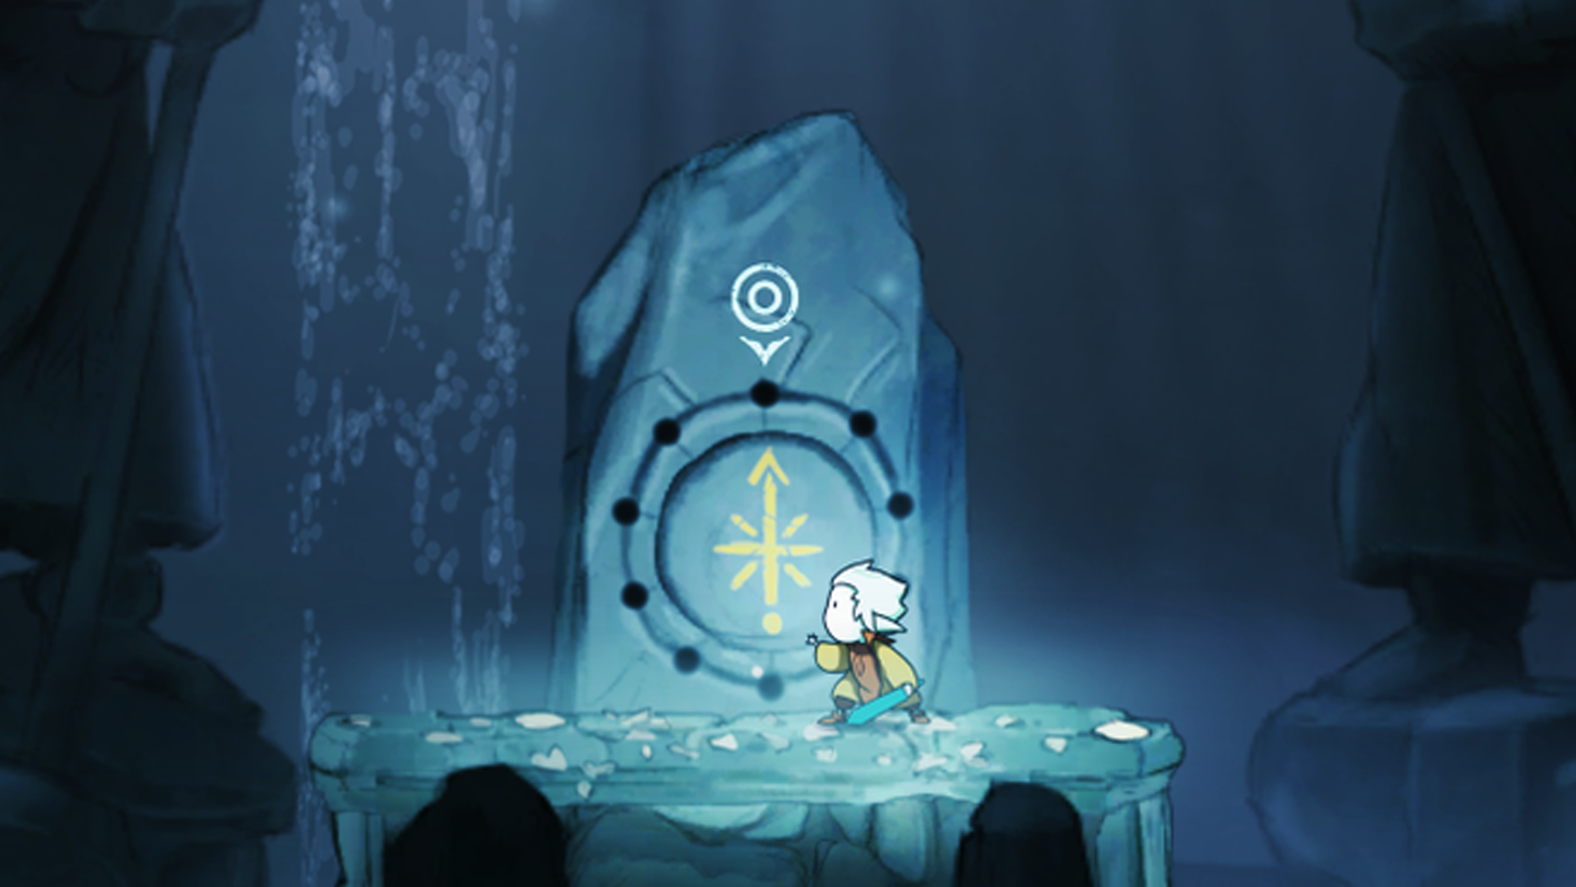 Screenshot from Greak: Memories of Azur with protagonist Greak about to solve a tricky puzzle with his powers